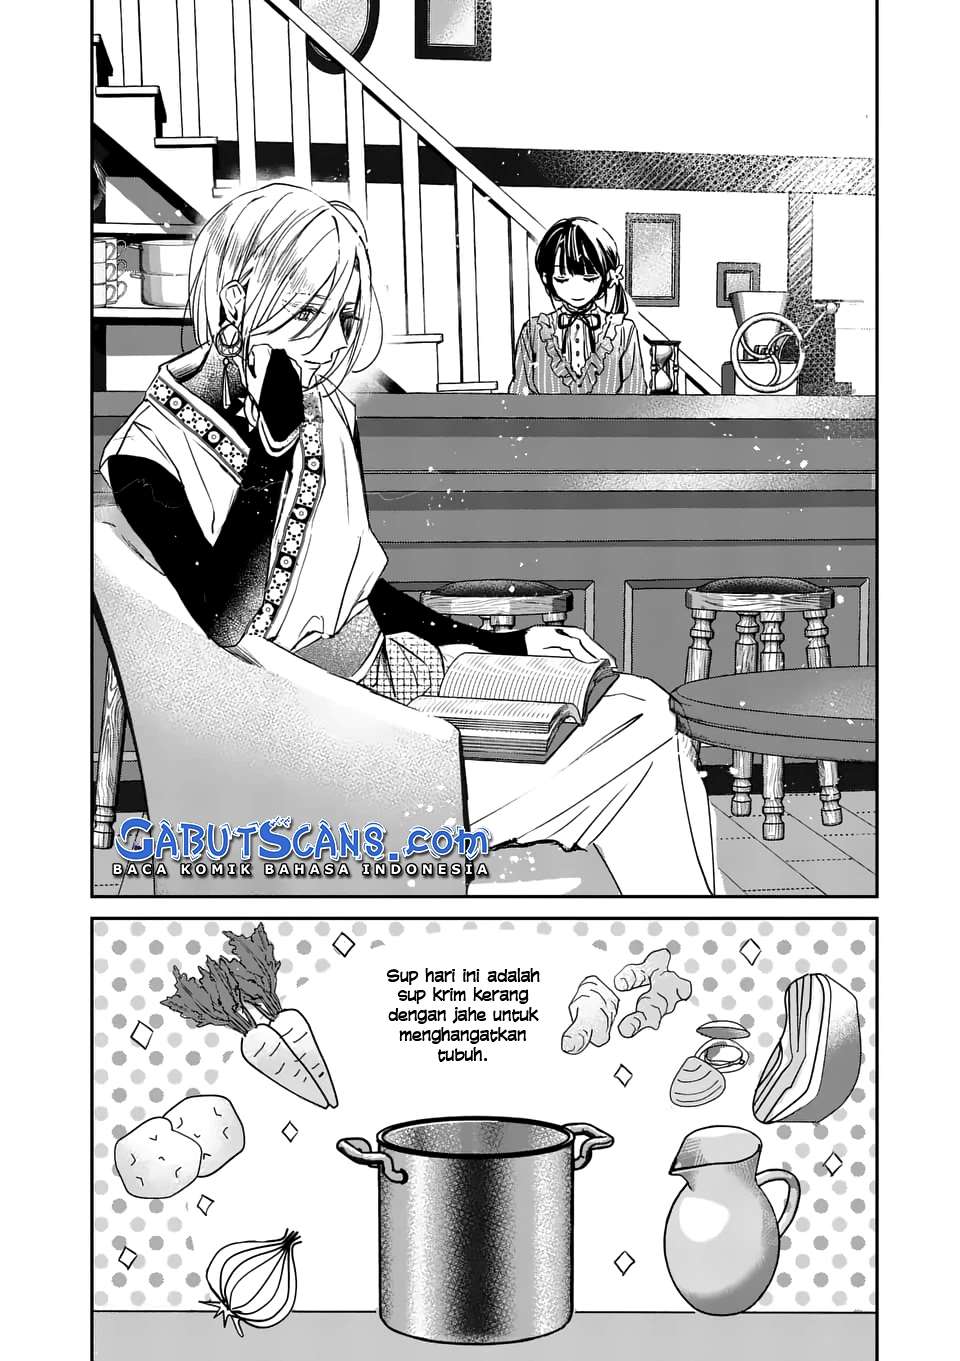 The Savior’s Book Café in Another World Chapter 16